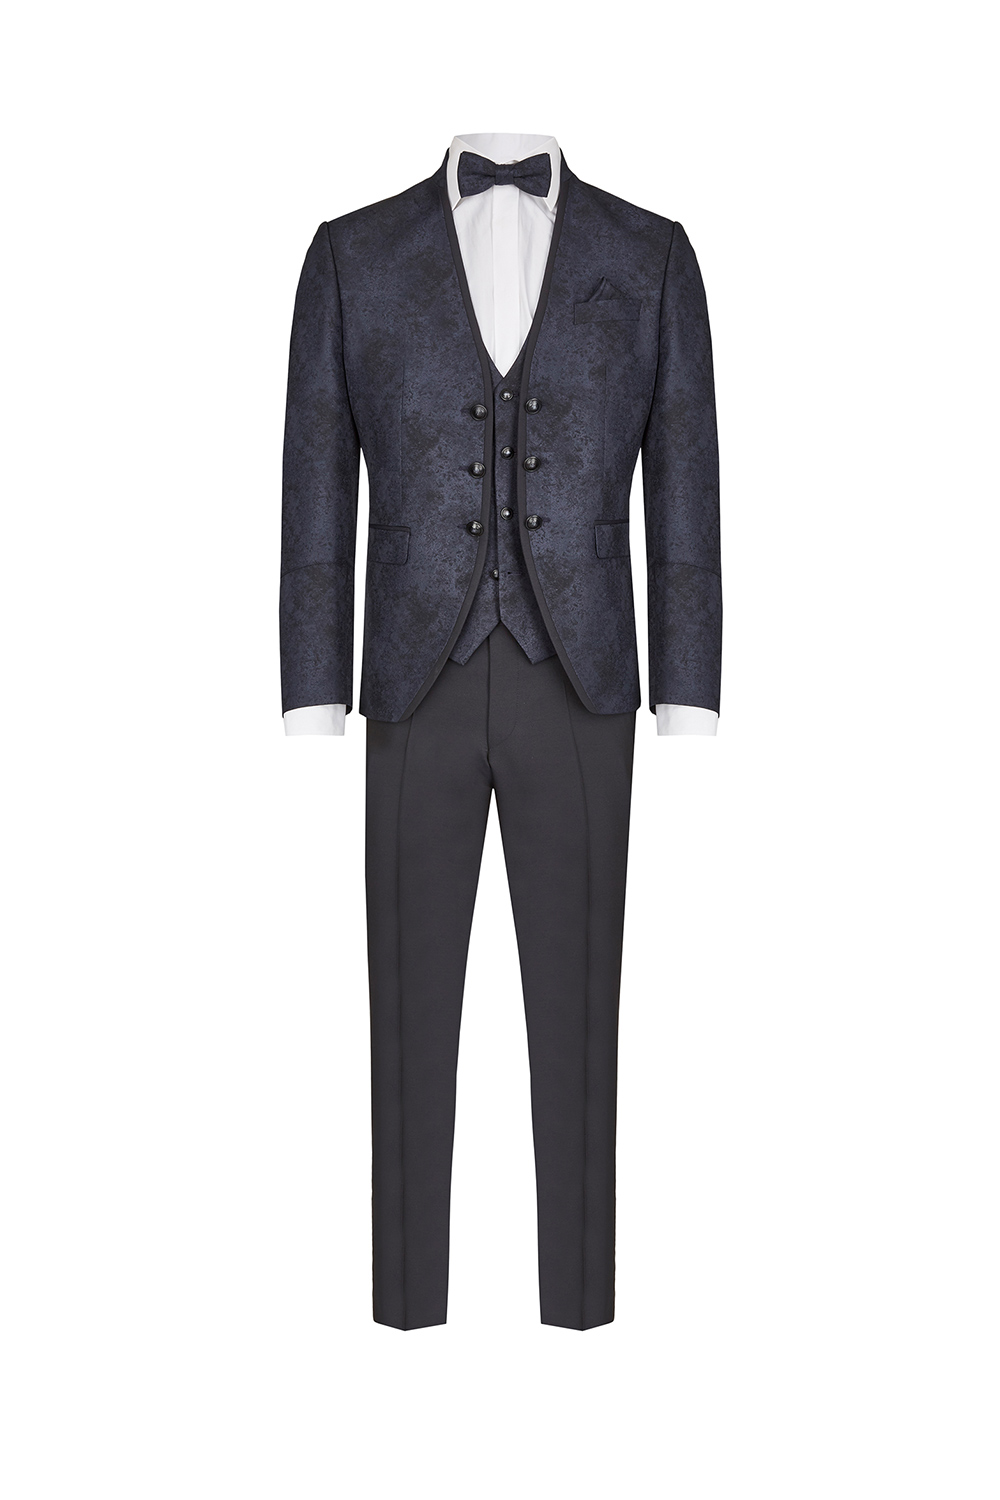 Royal Navy 3 Piece Suit - Tom Murphy's Formal and Menswear